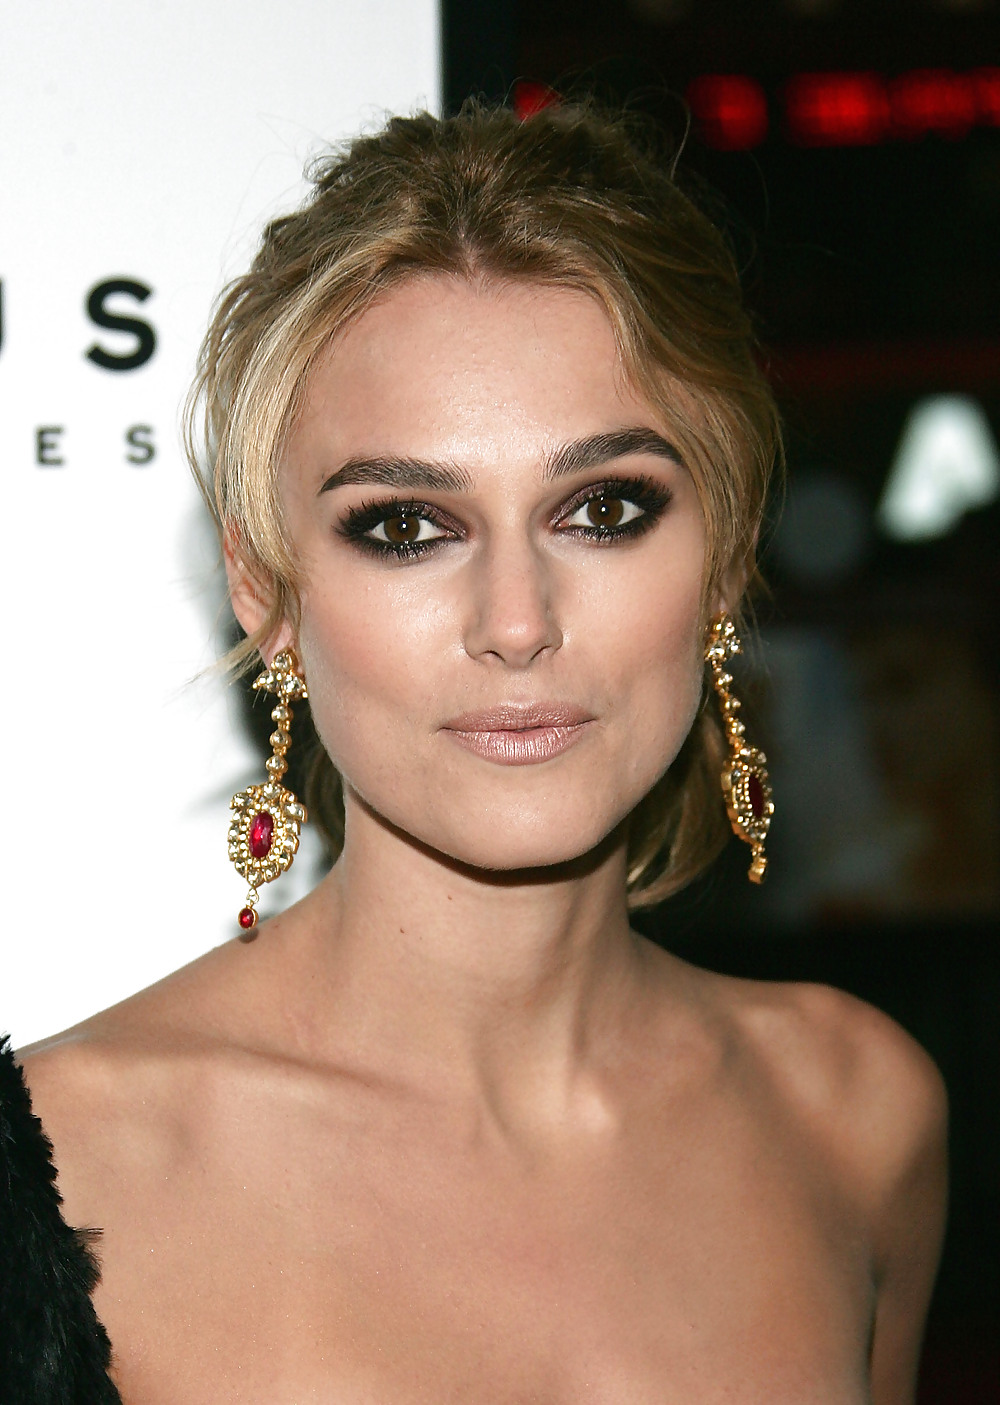 Keira Knightley The Royal Lady of England #35650449